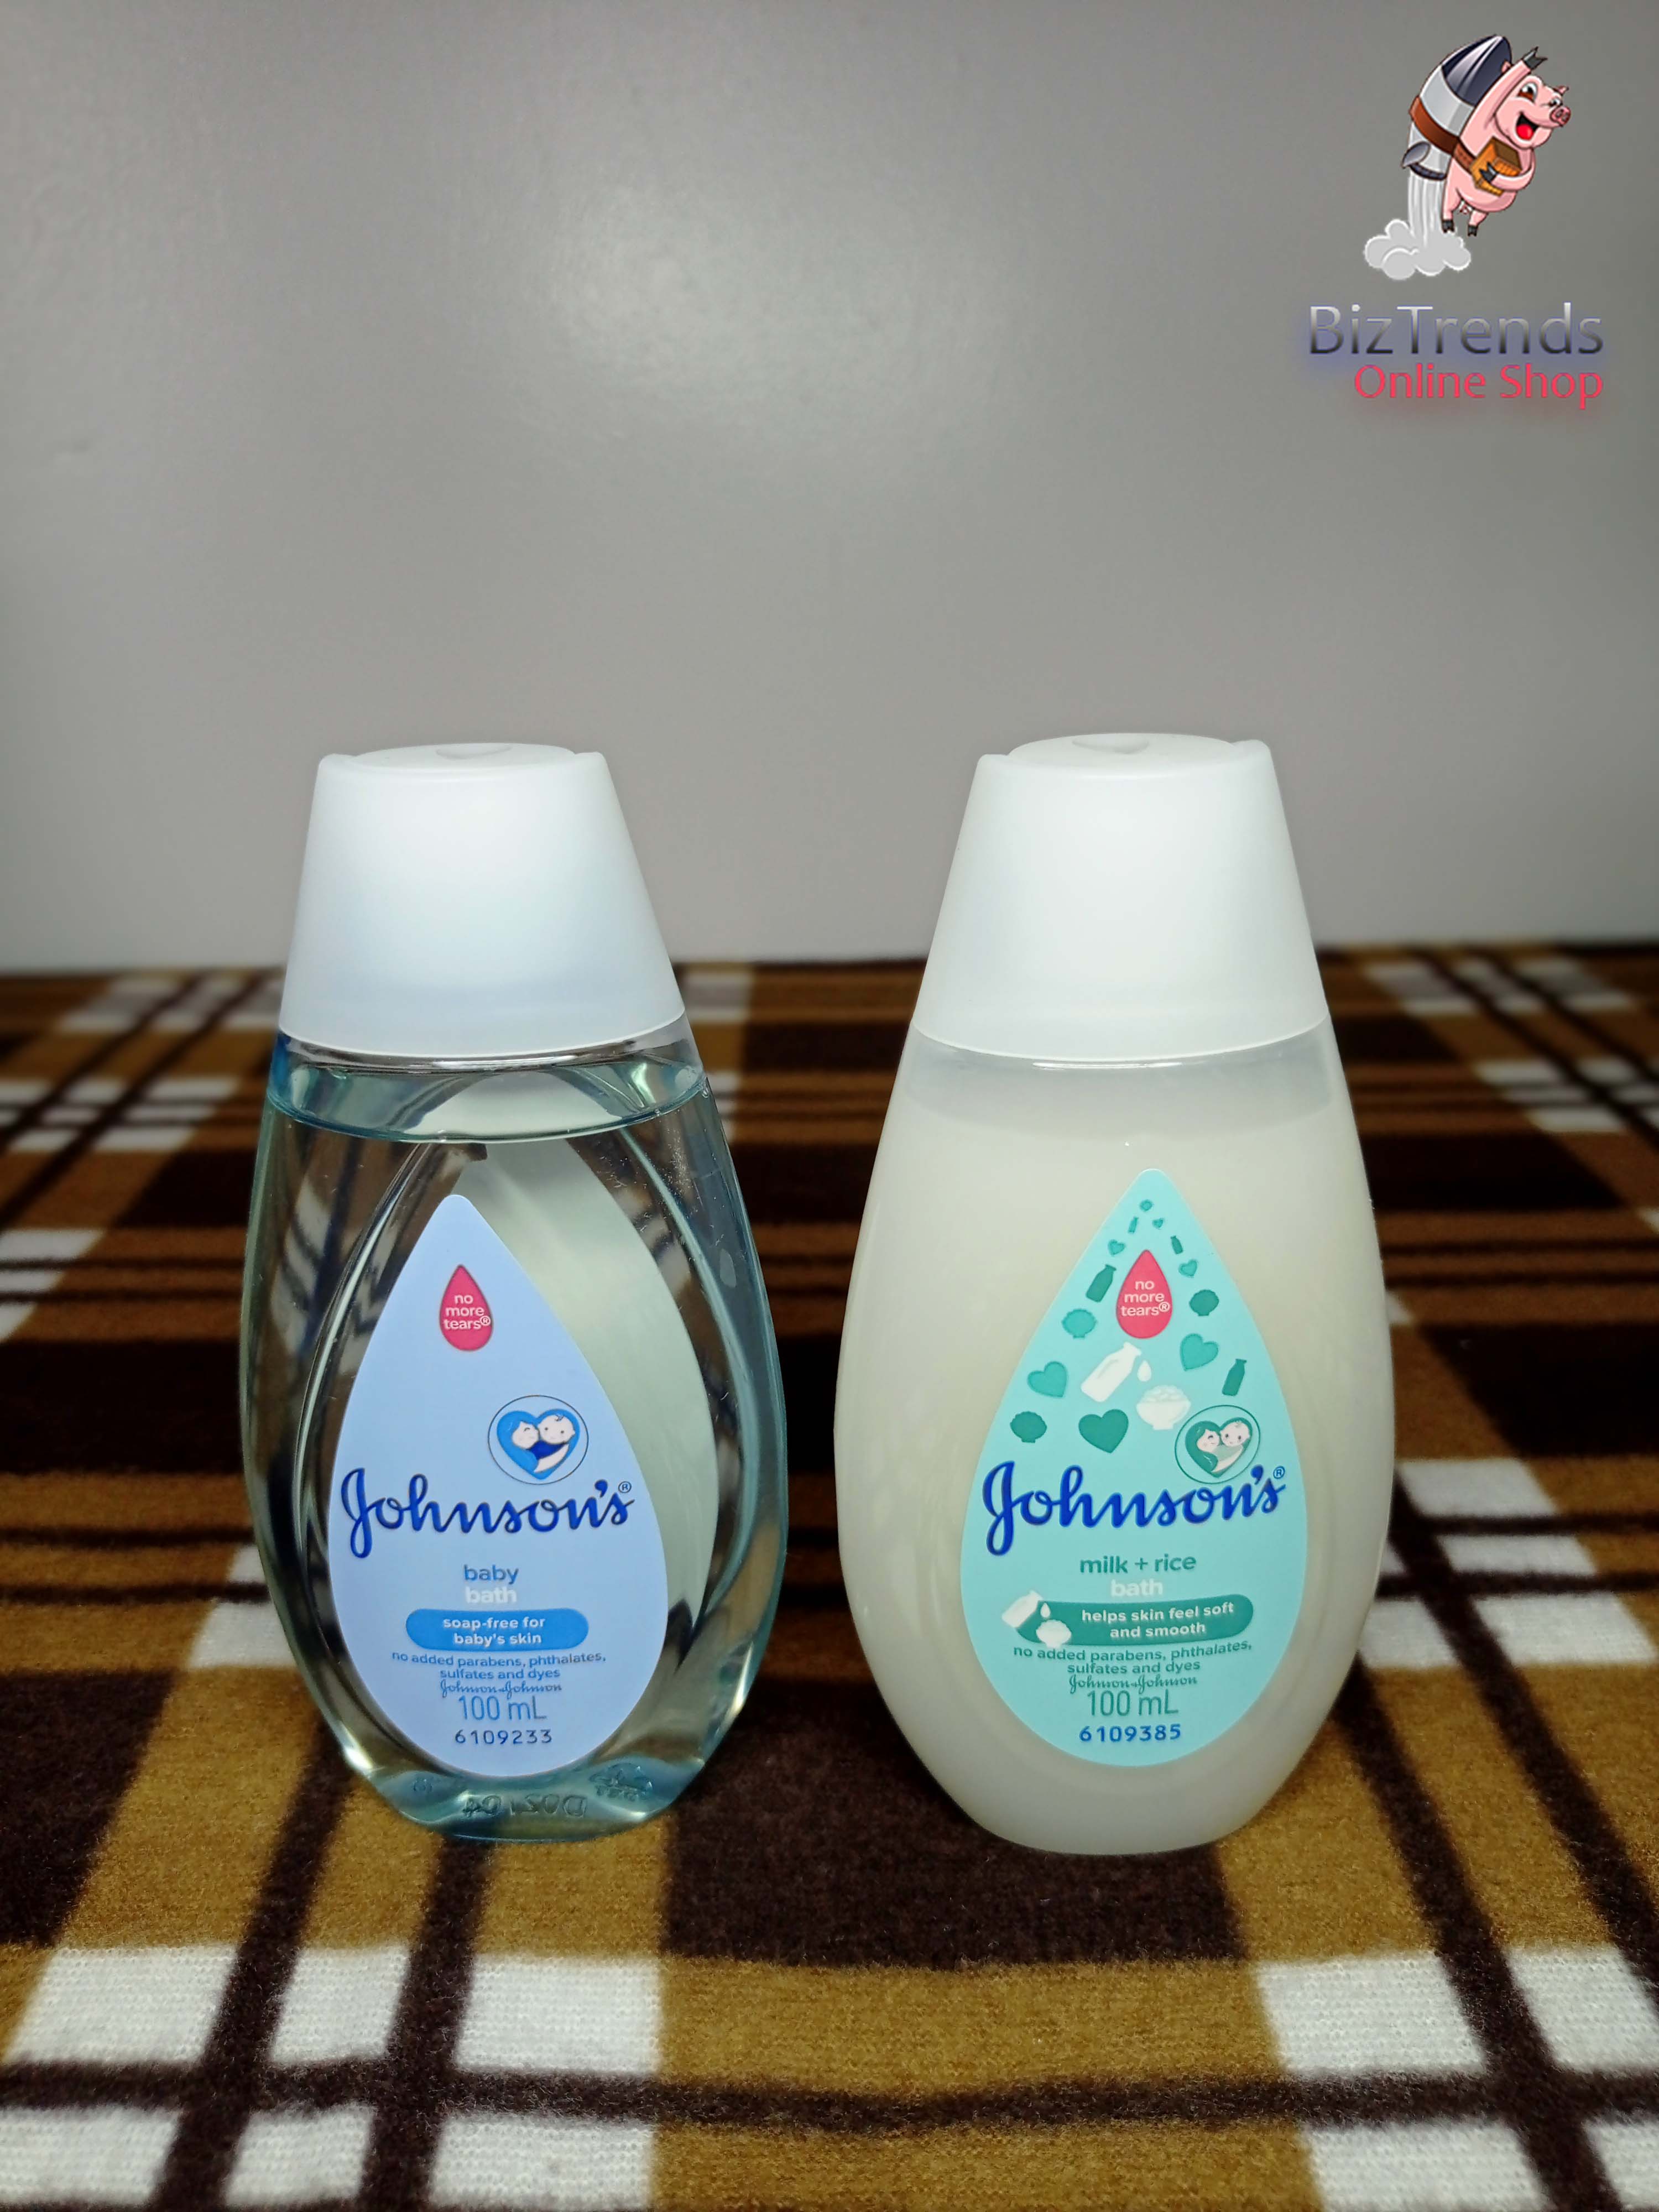 johnson johnson baby products online shopping